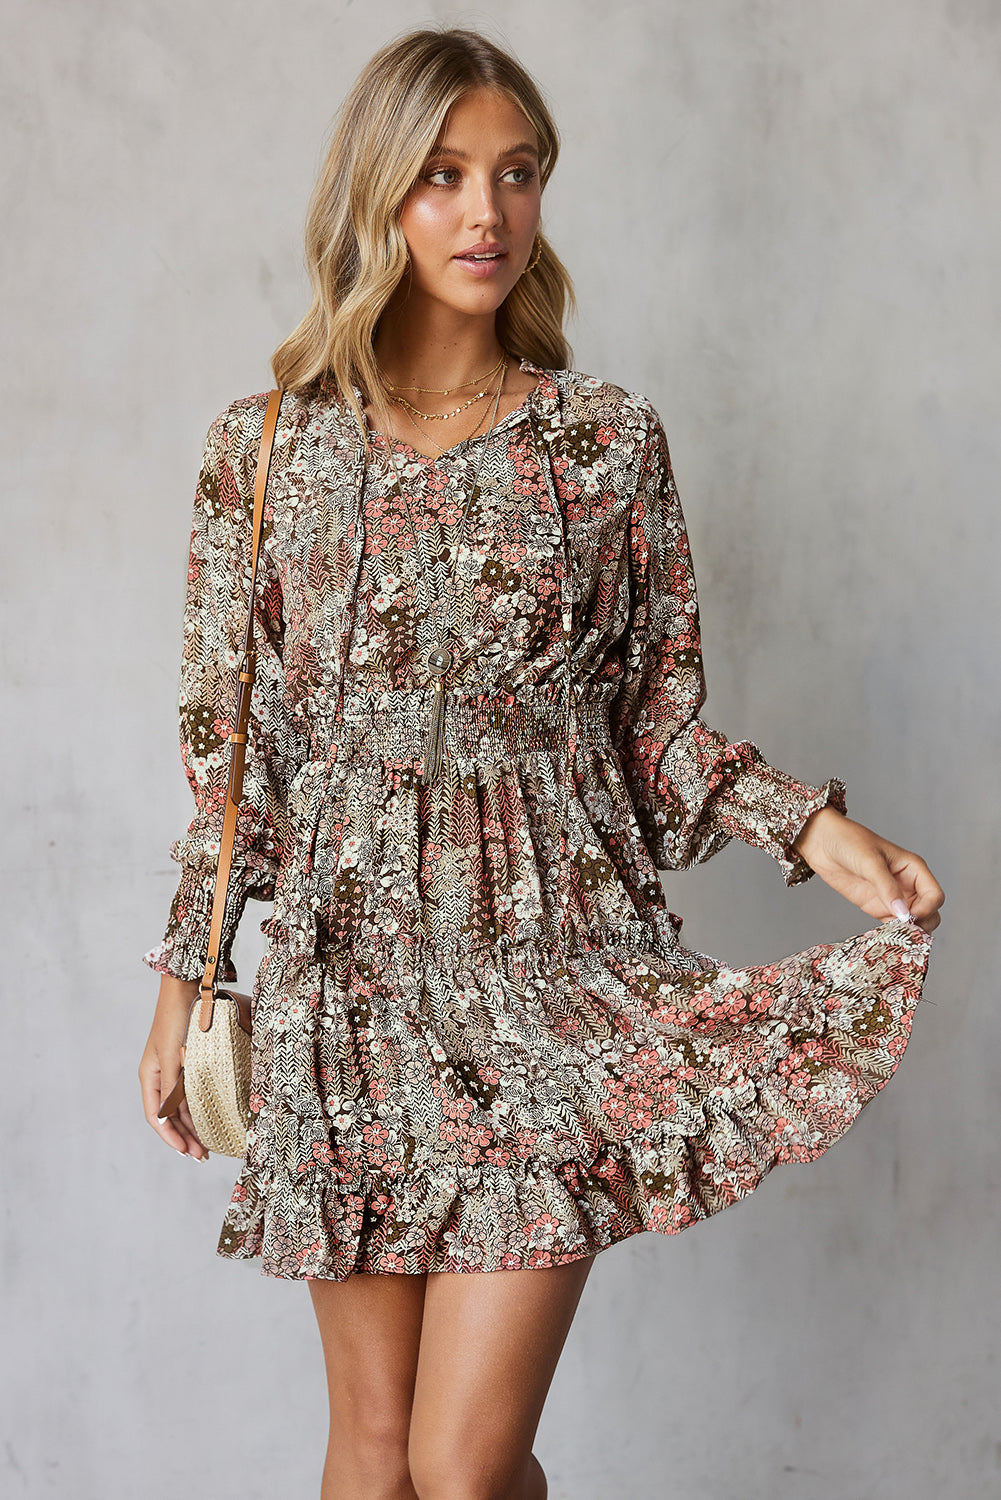 Summer Wedding Ready: Floral Smocked Tie-Neck Dress for Beach Guests and Party-Goers